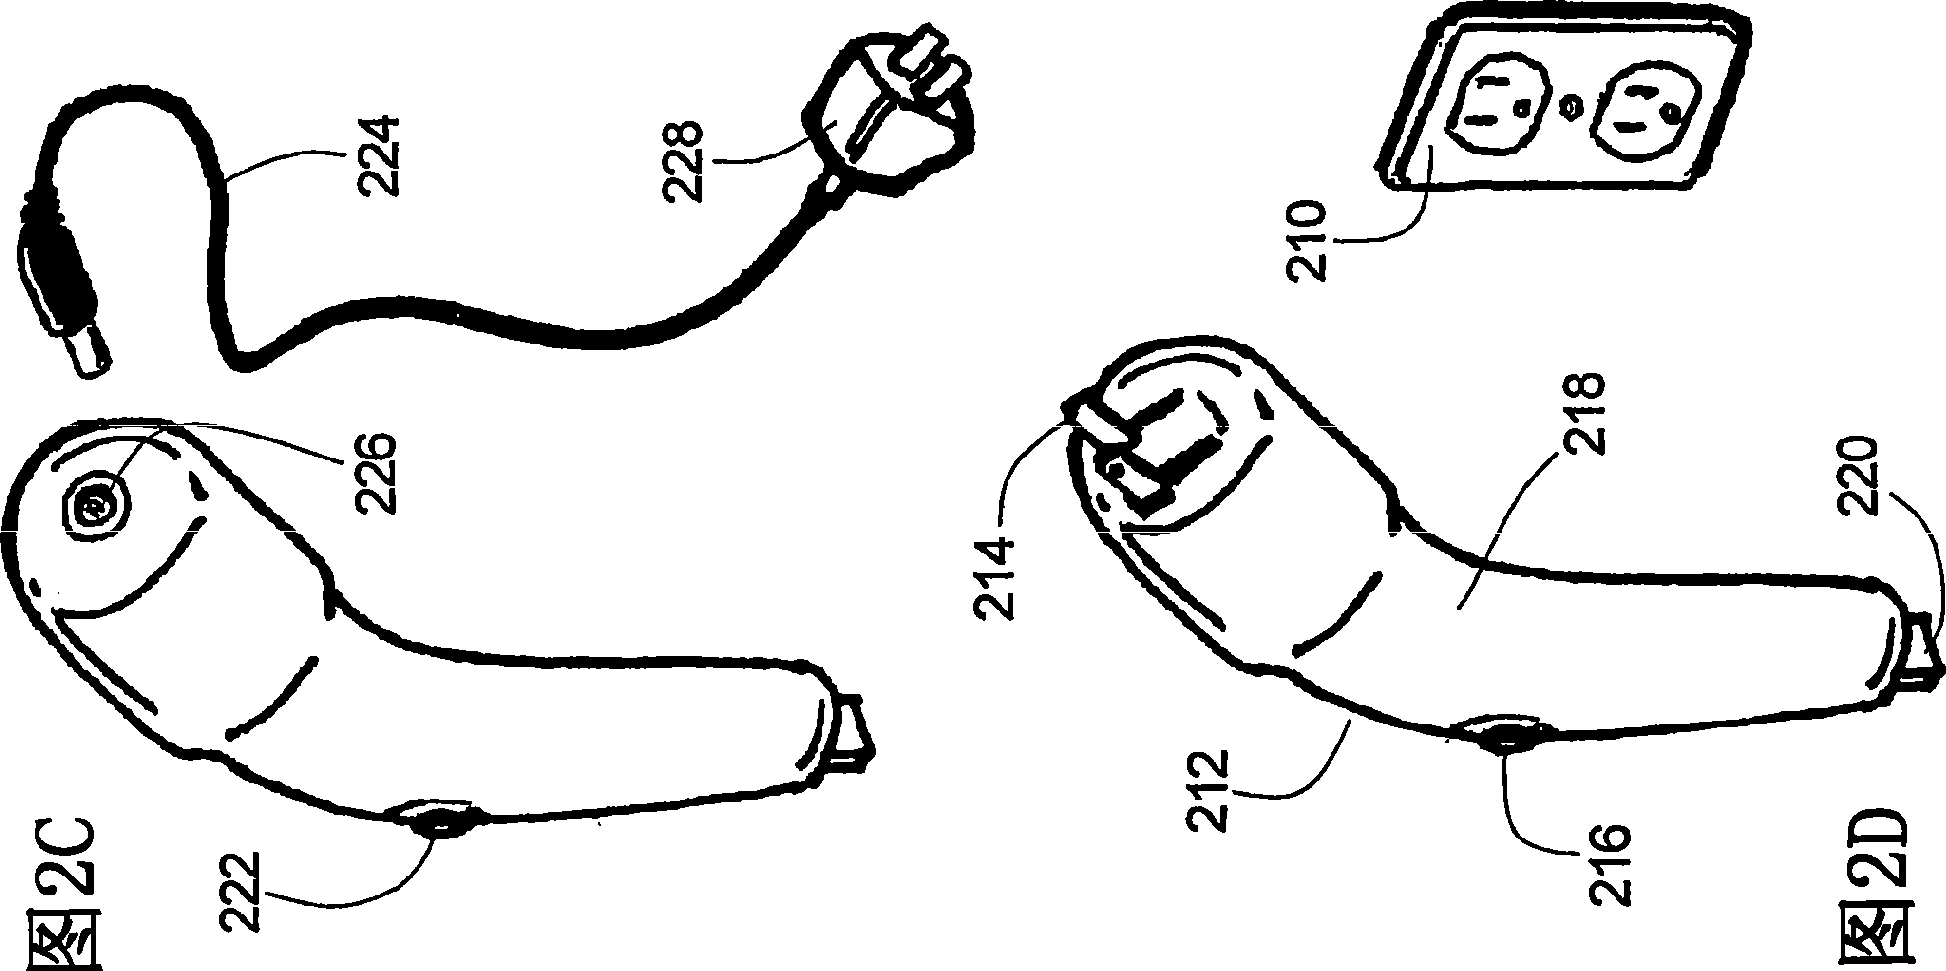 Apparatus and method for cleaning surfaces